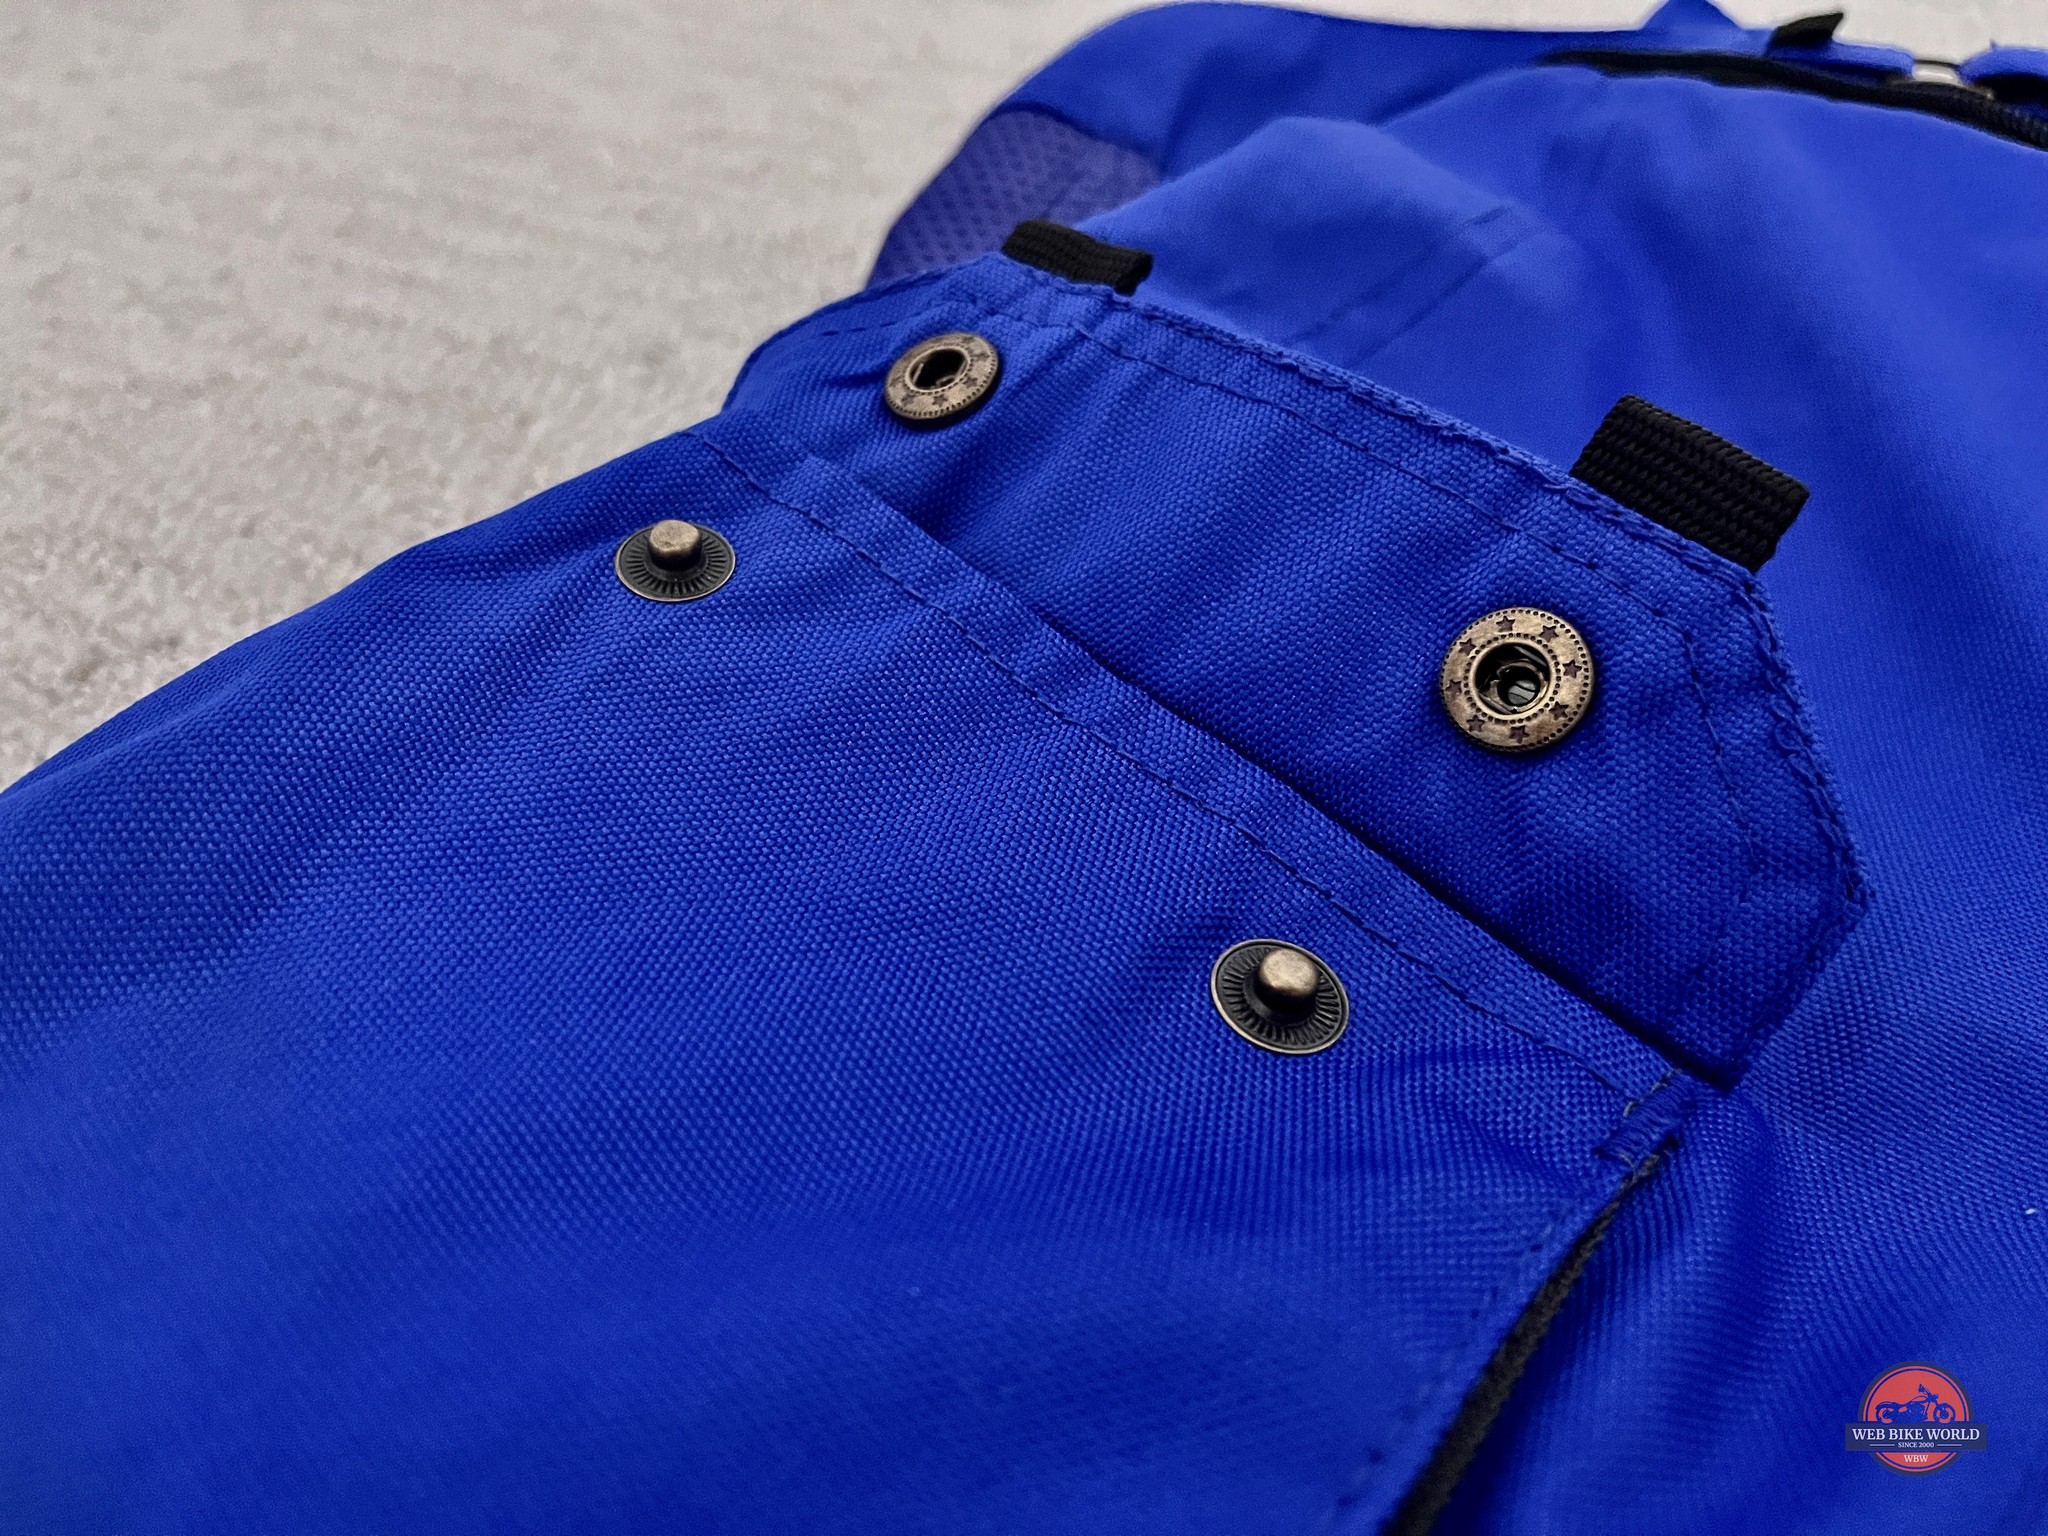 Snap buttons of a pocket on the Raven Rova Falcon Textile Pants